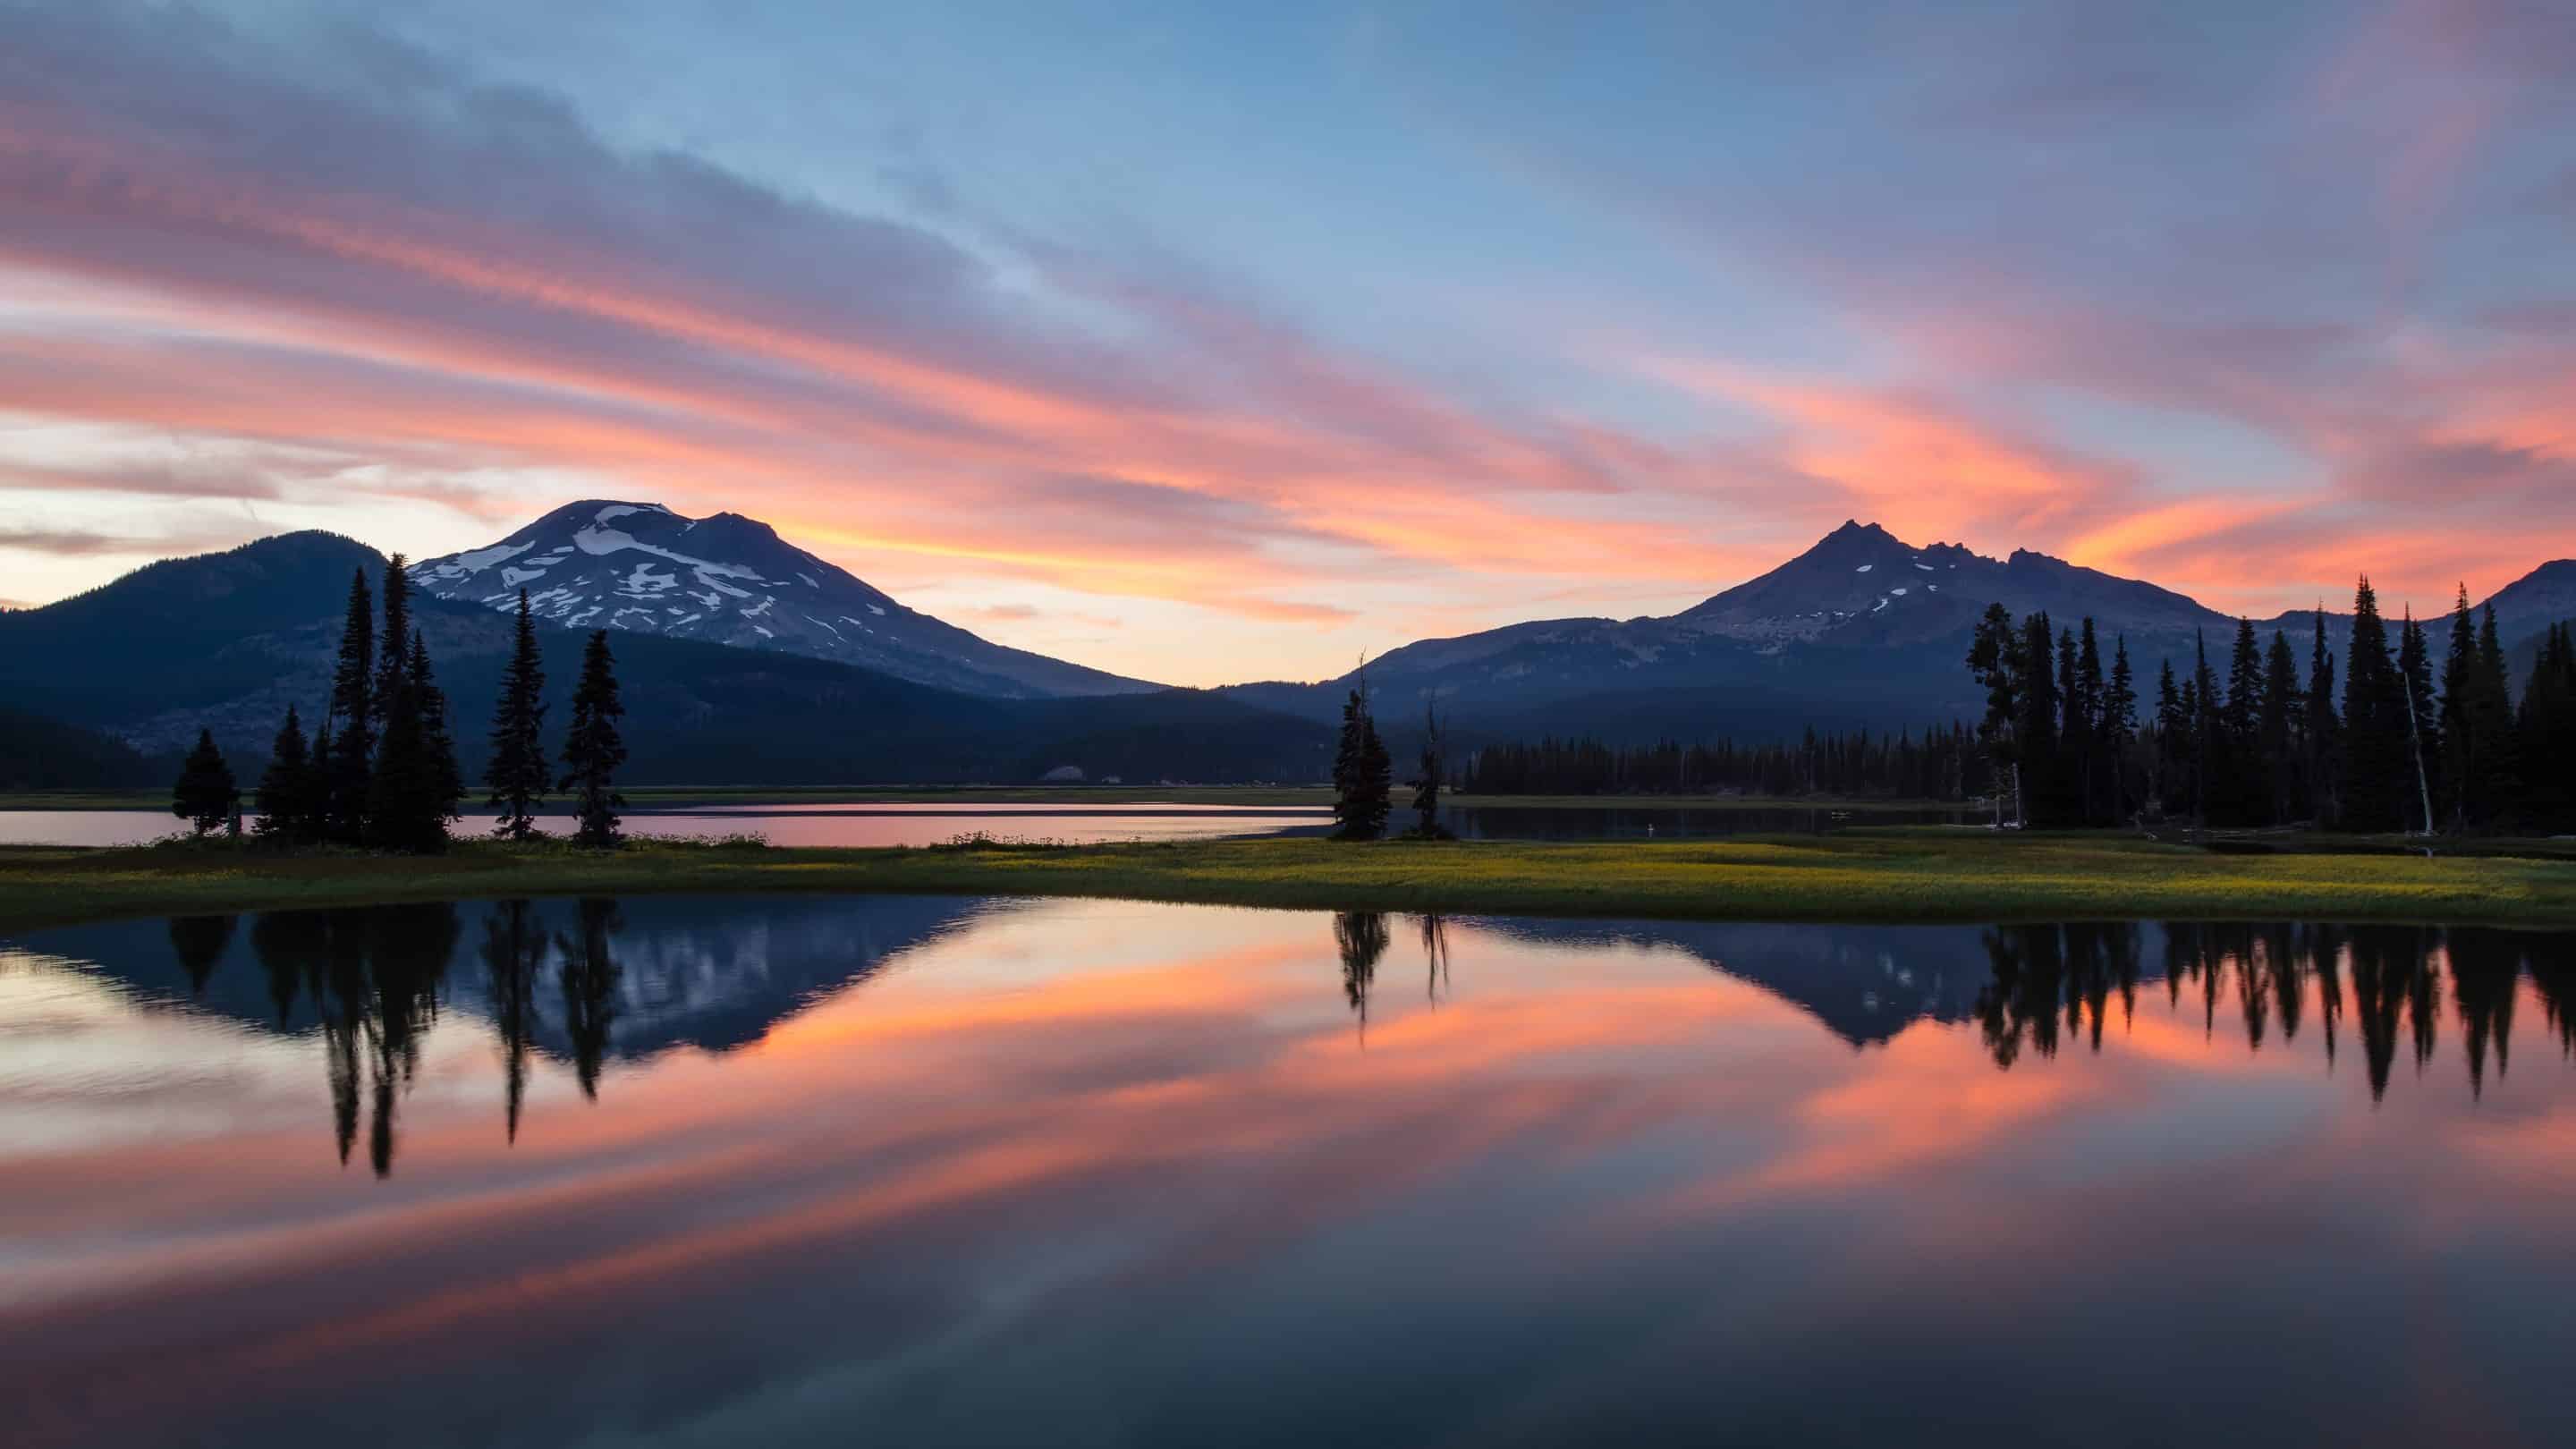 mountain and lake landscape photo in Bend, OR